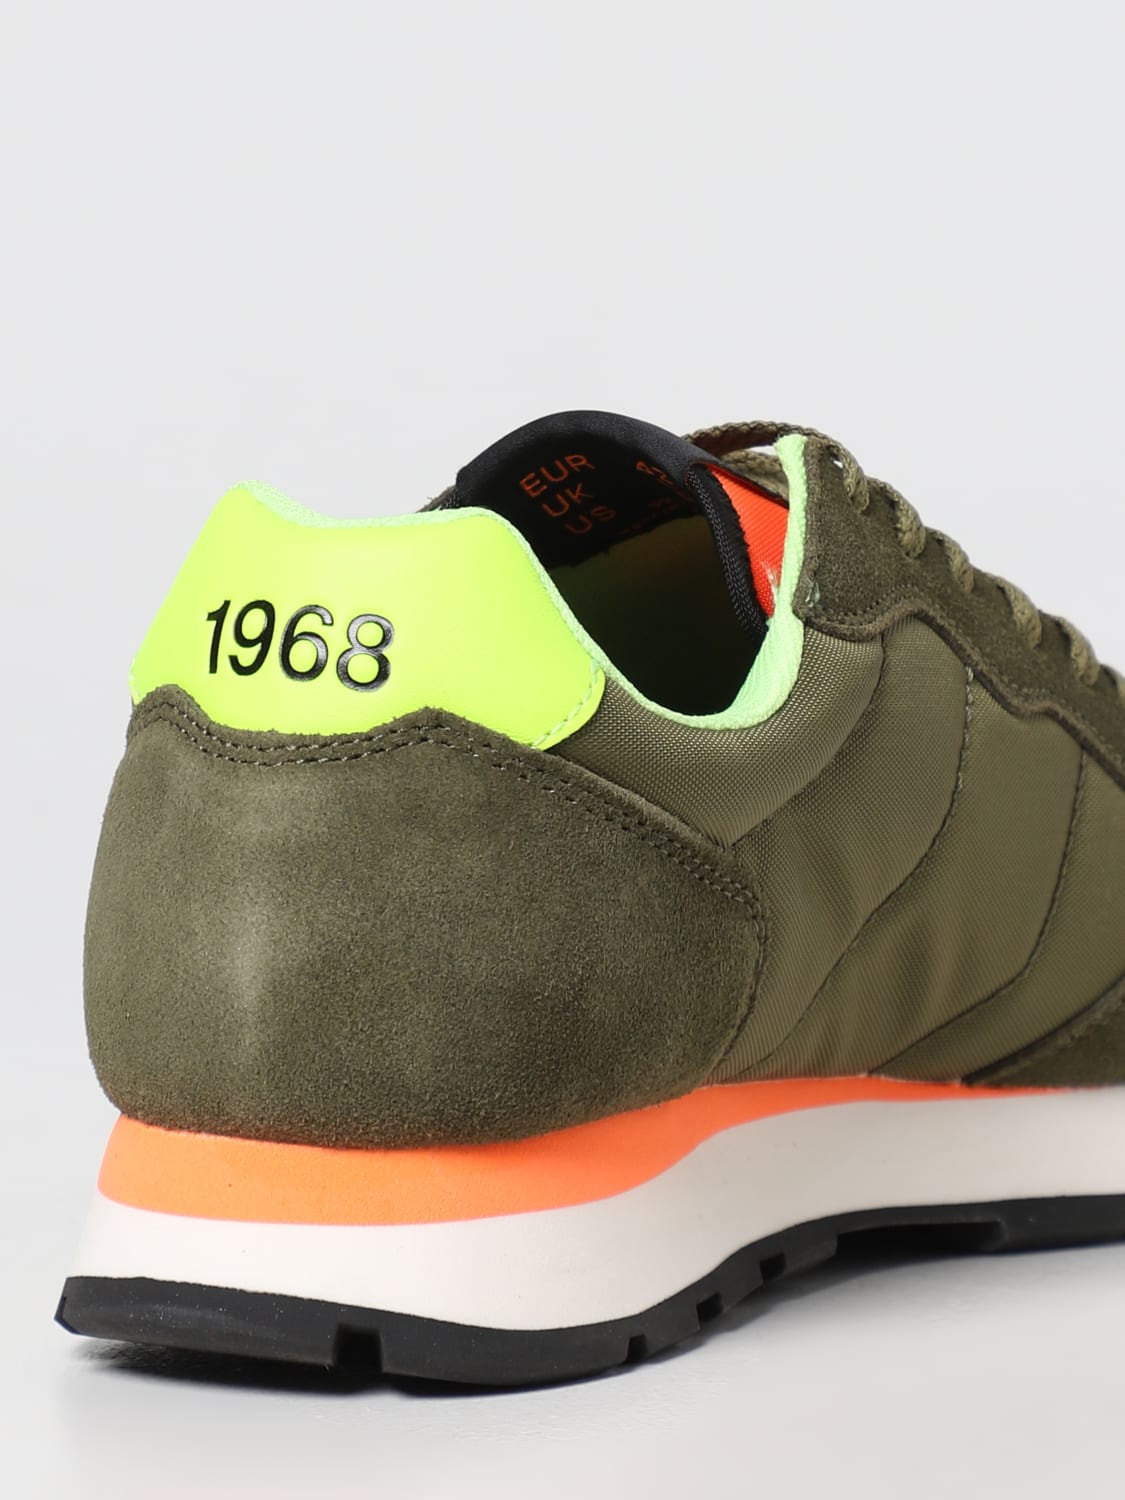 SUN 68: sneakers for man - Military | Sun 68 sneakers BZ33102 online on ...